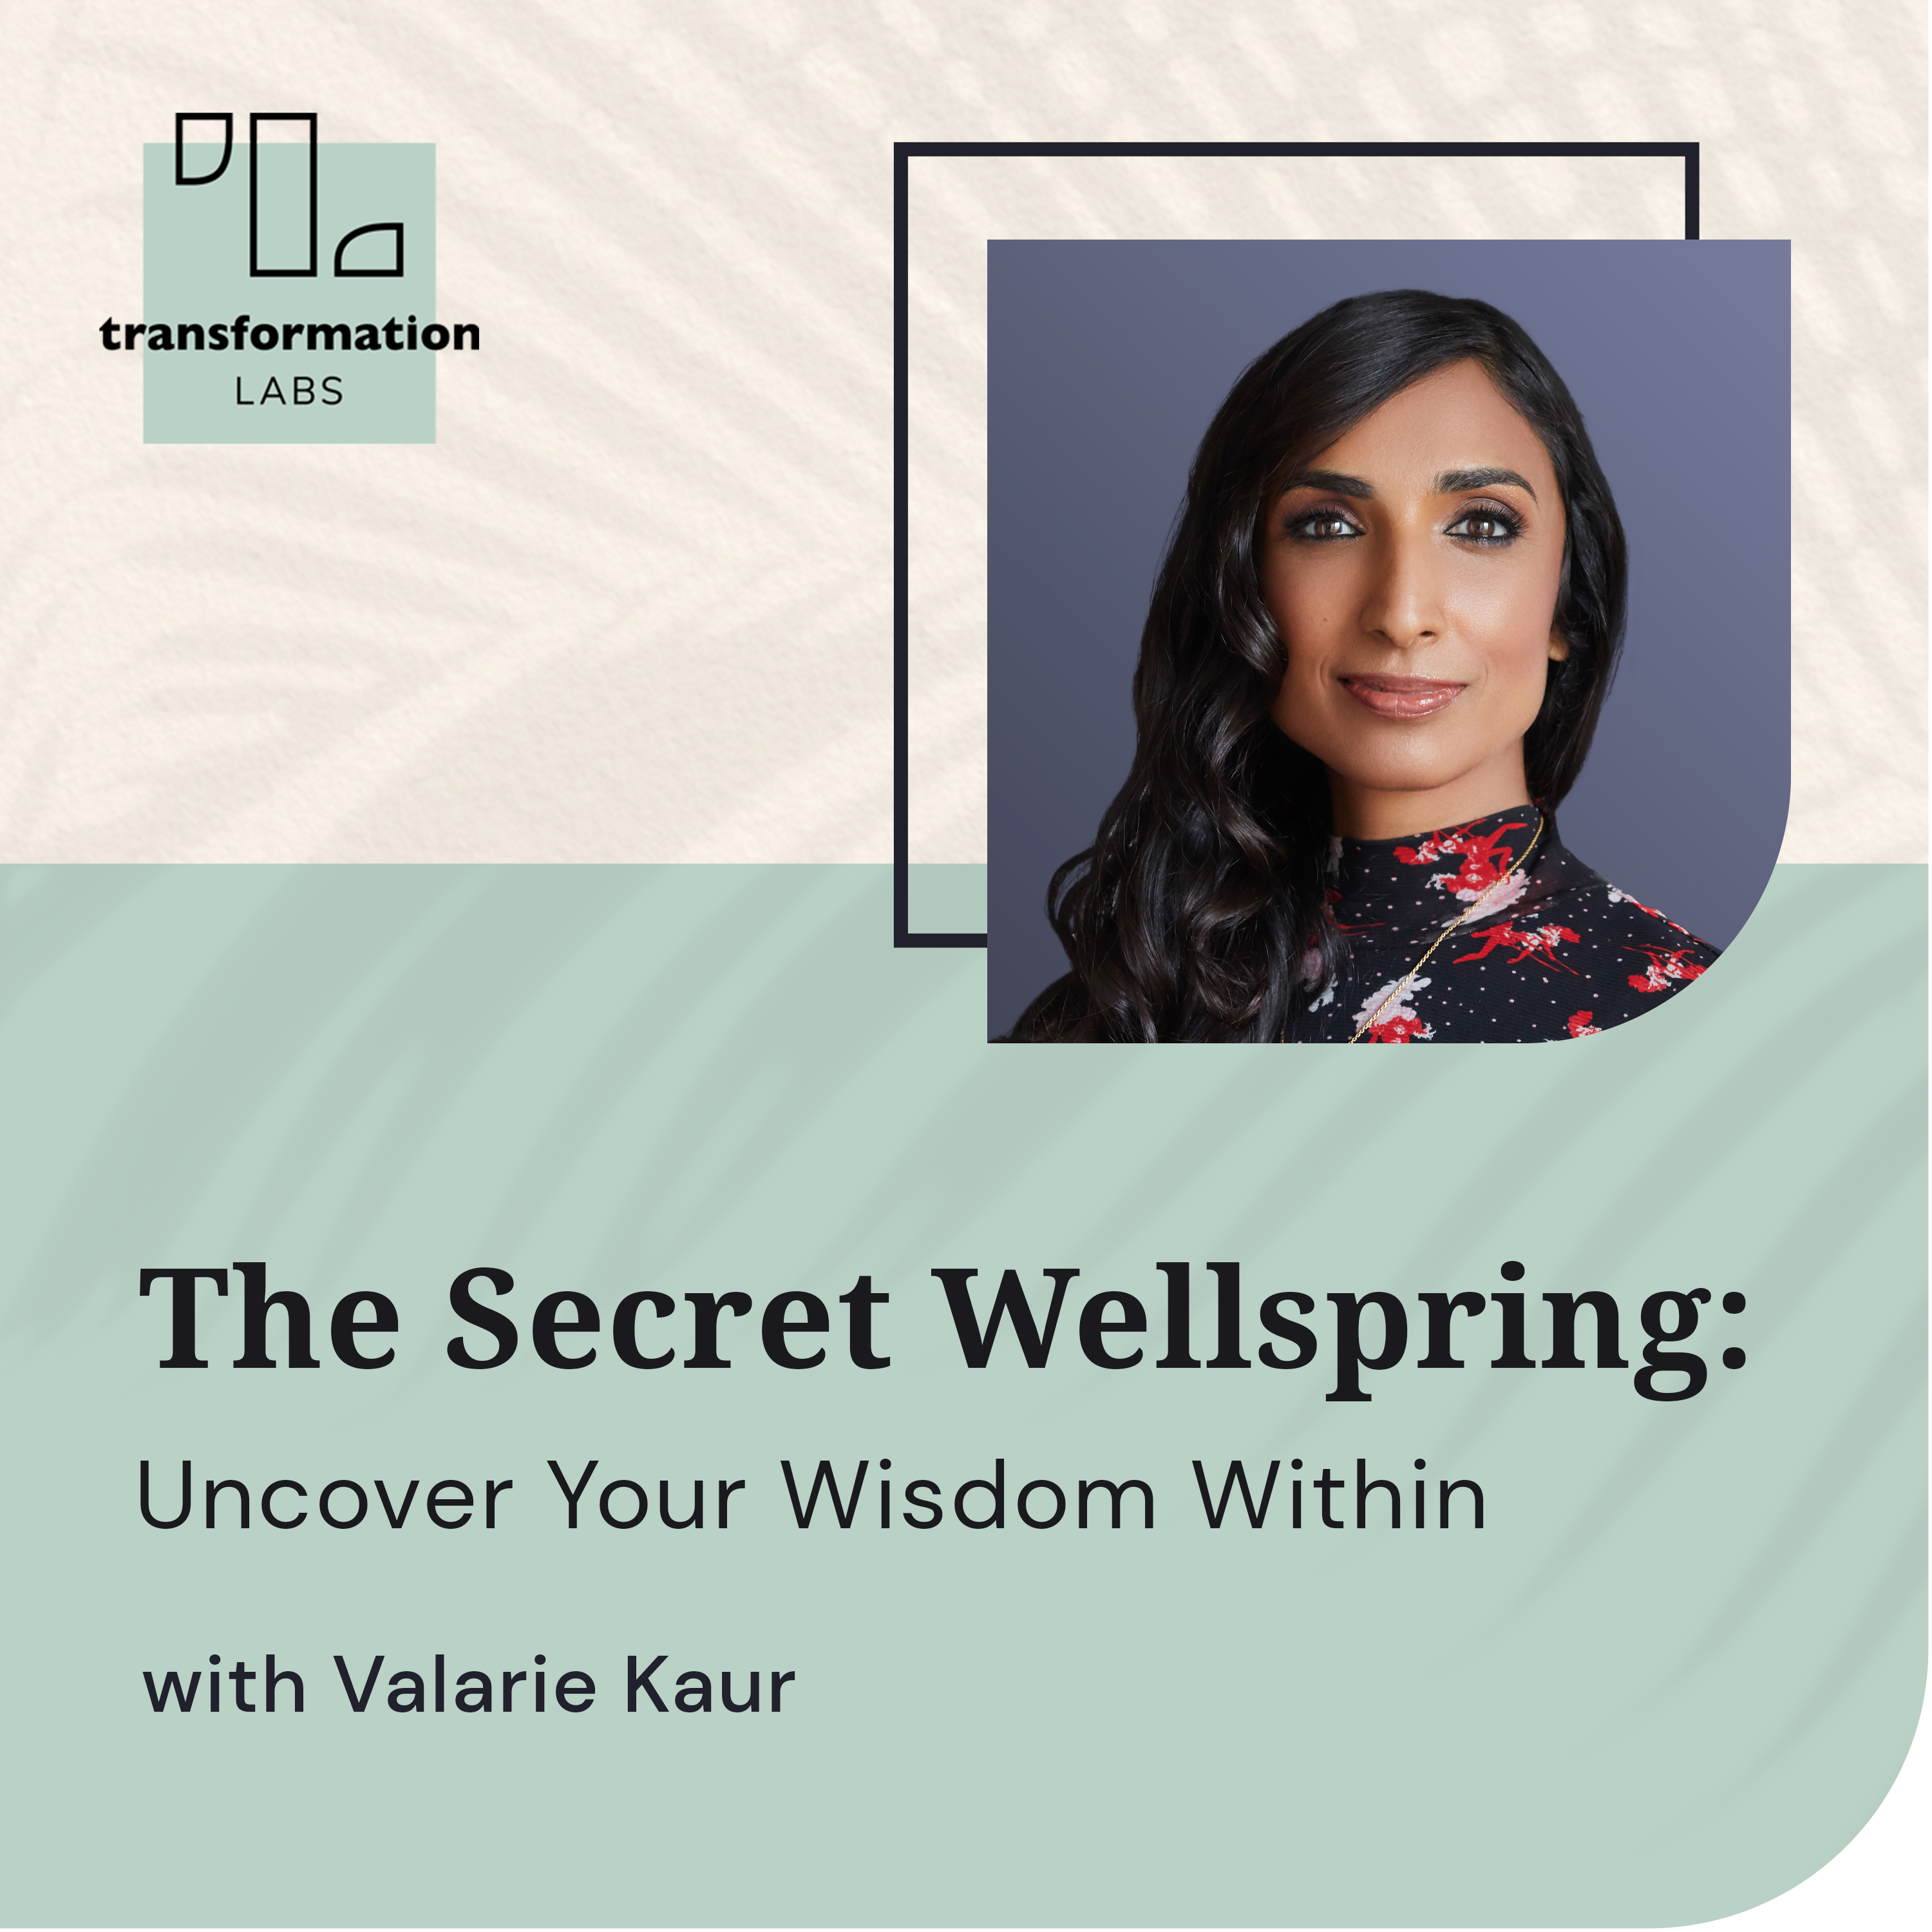 The Secret Wellspring: Uncover Your Wisdom Within